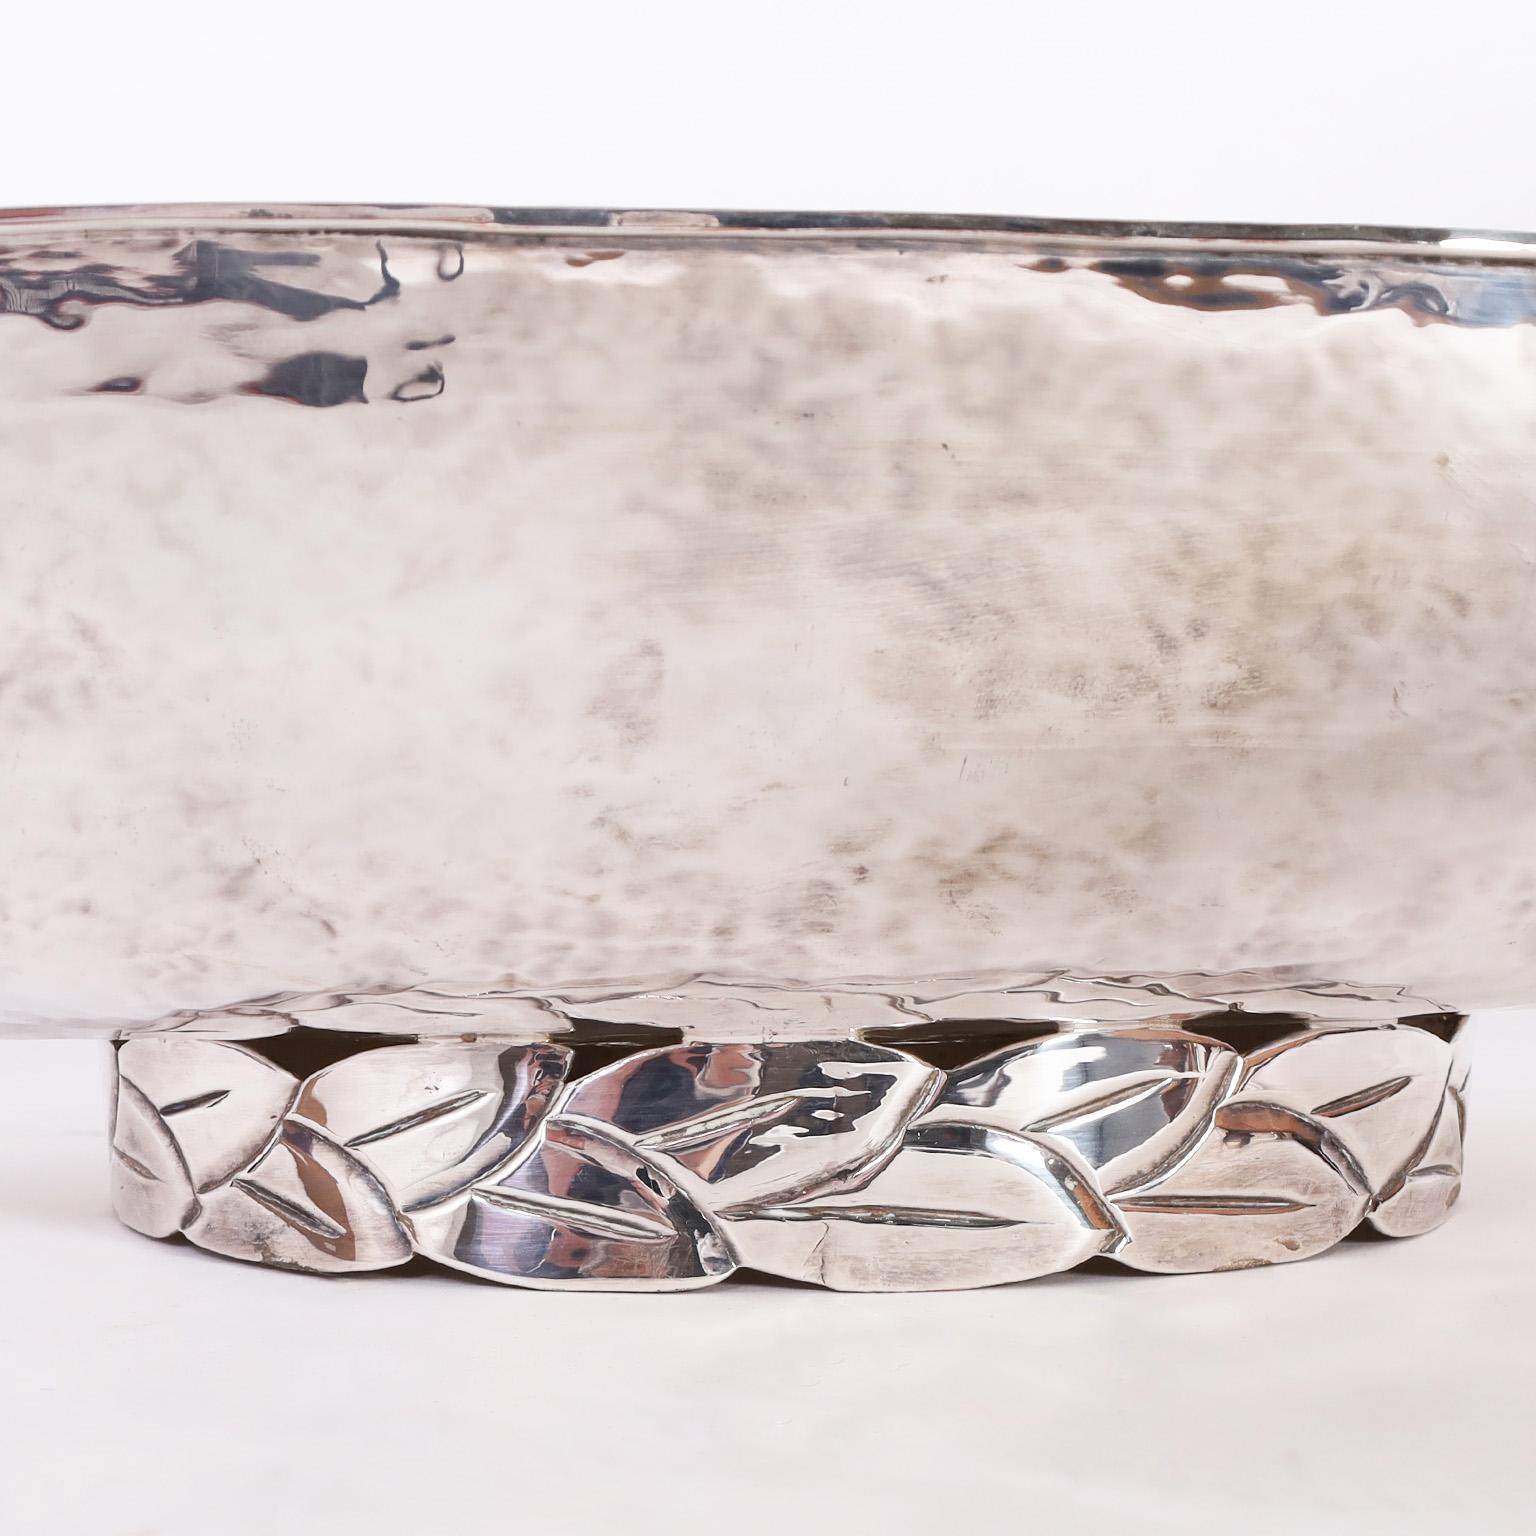 Large Elongated Silver Plate Bowl with Toucans by Emilia Castillo 1